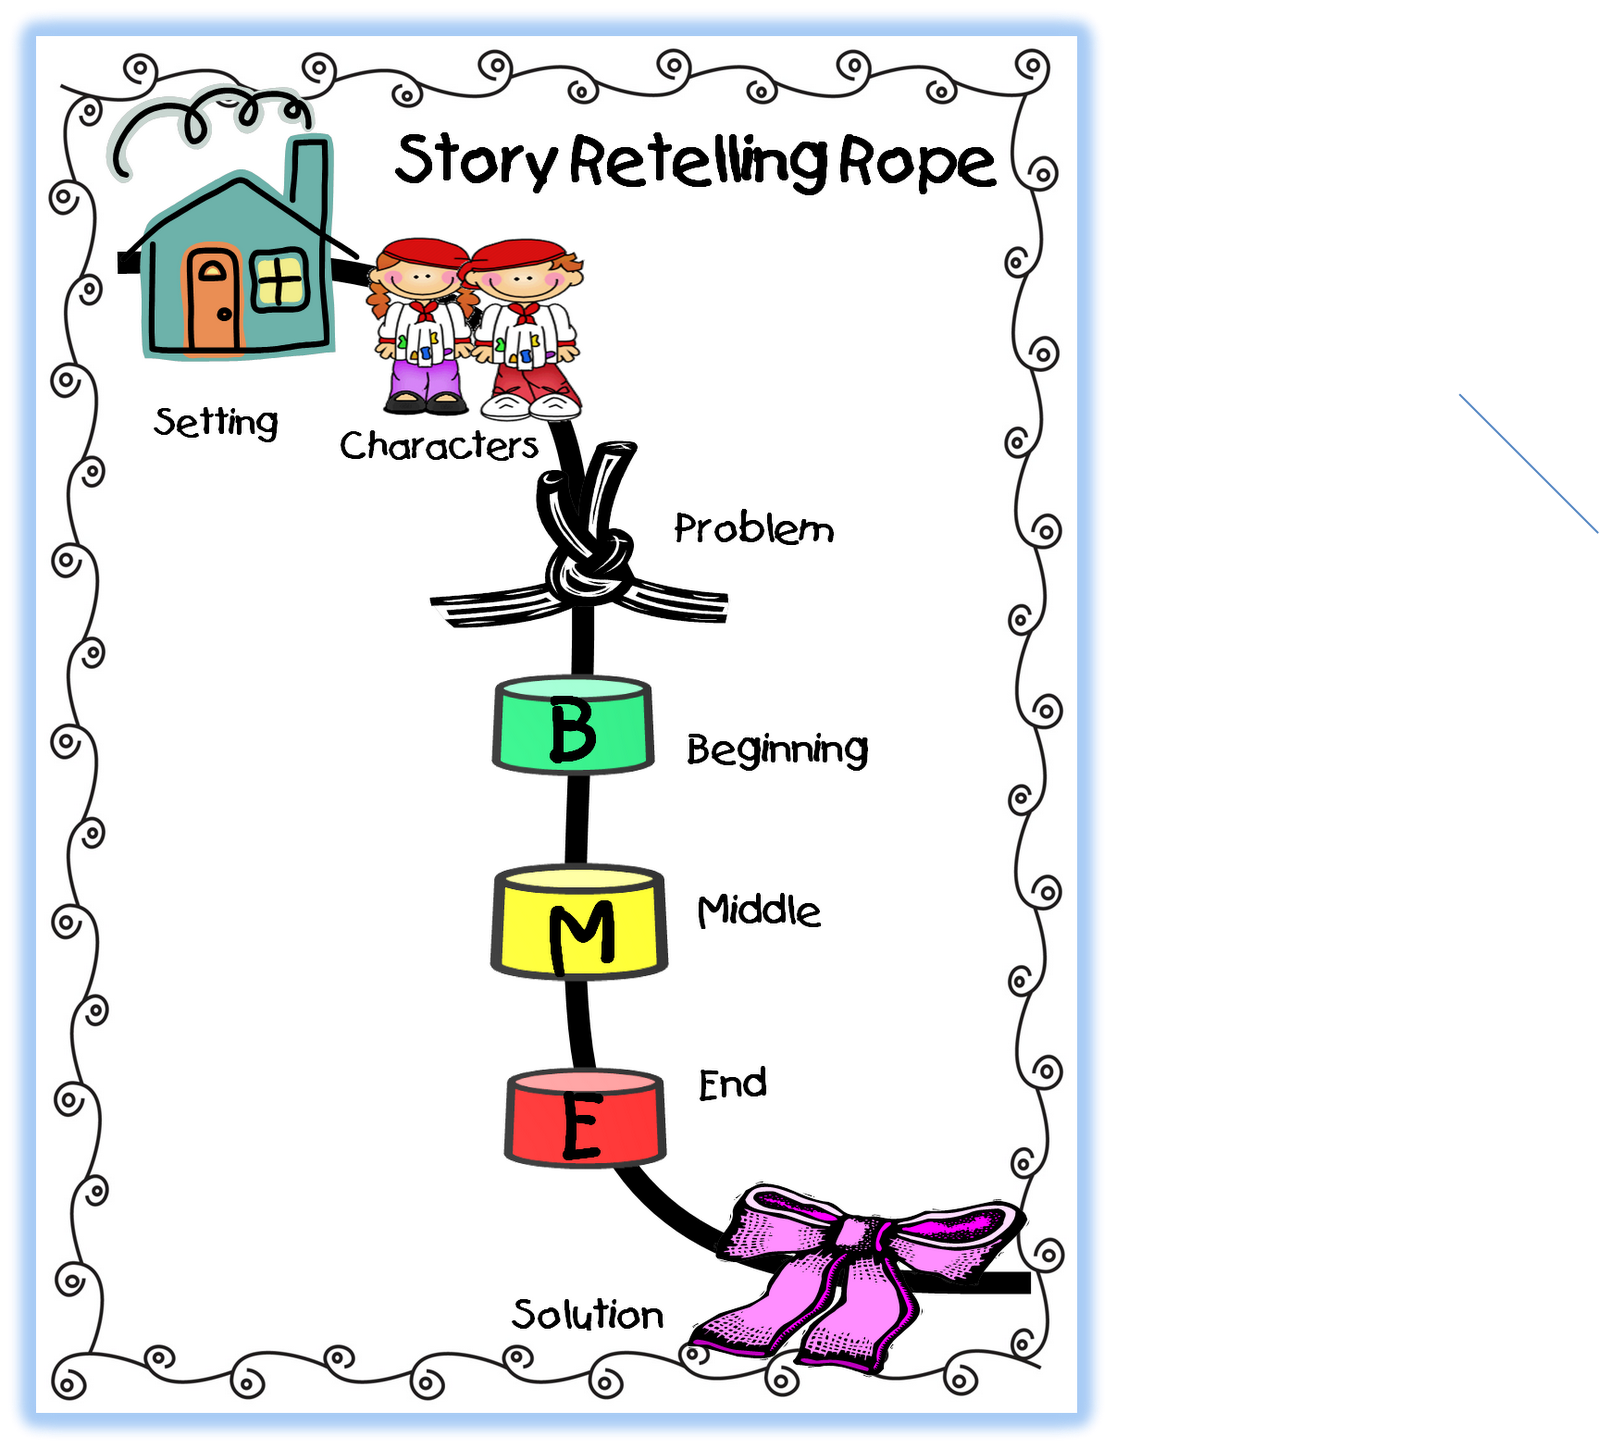 free-story-retelling-cliparts-download-free-story-retelling-cliparts